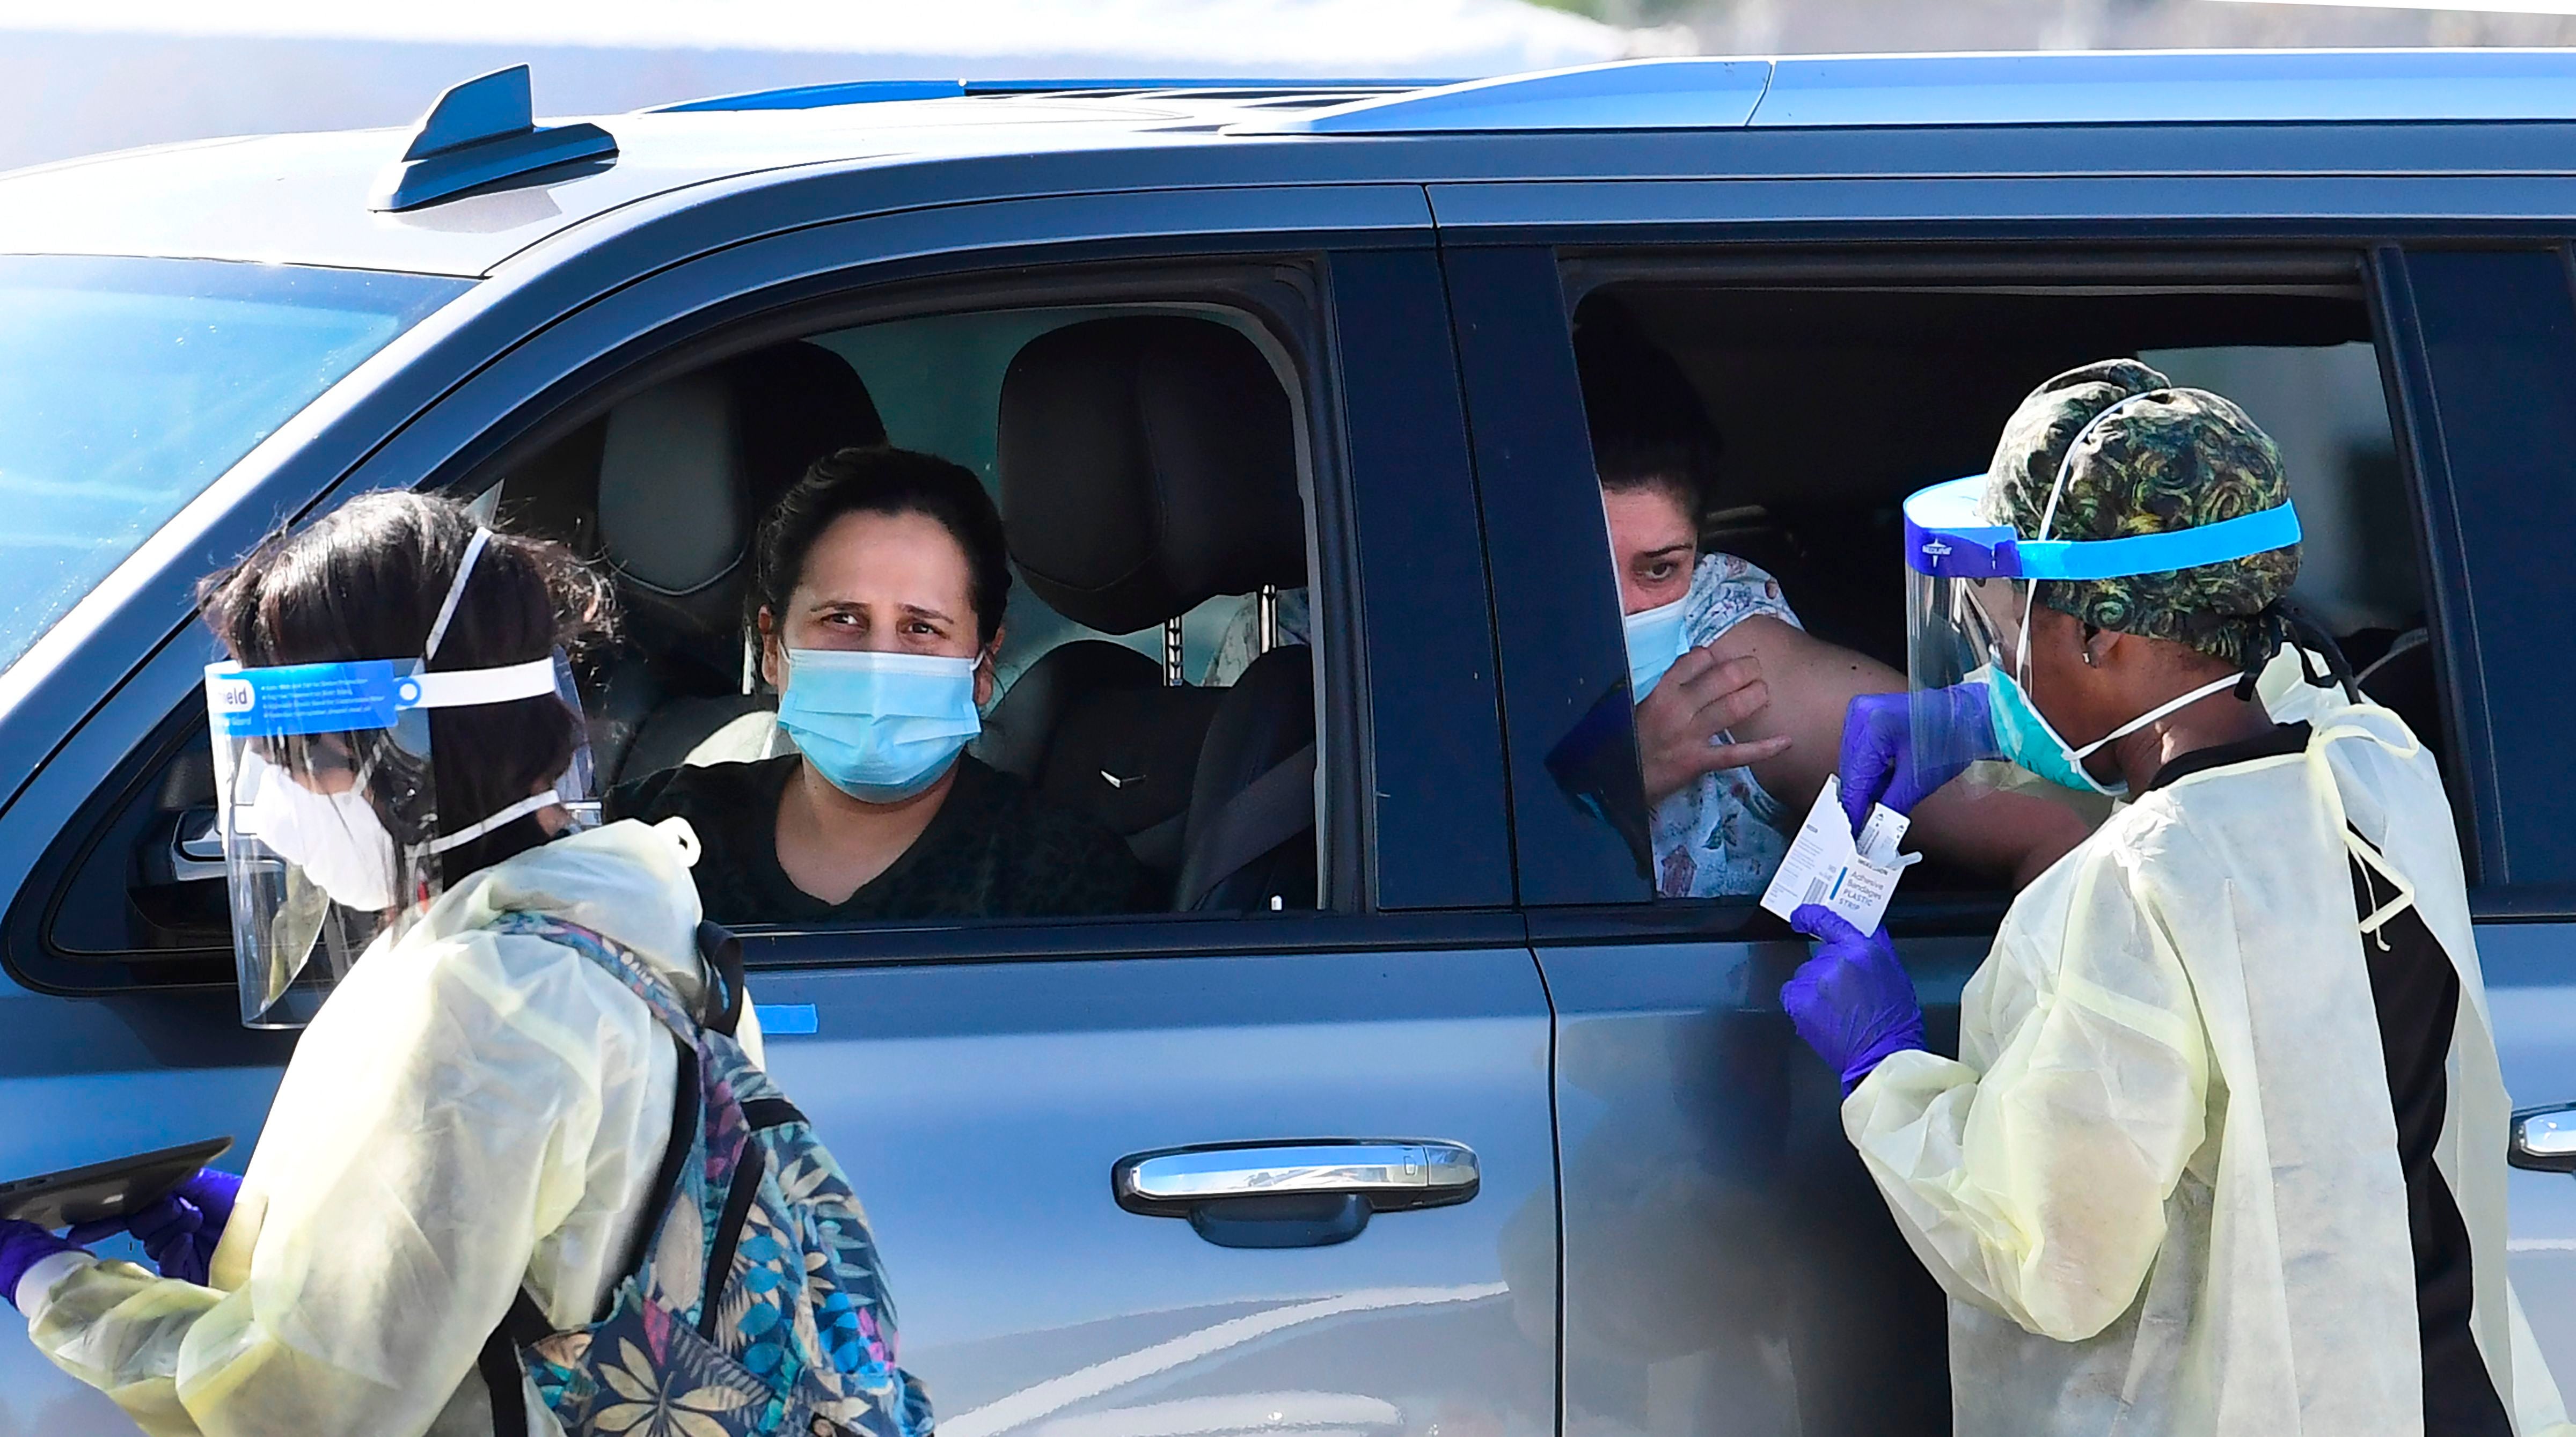 People pull up in their vehicles for Covid-19 vaccines in the parking lot of The Forum in Inglewood, California